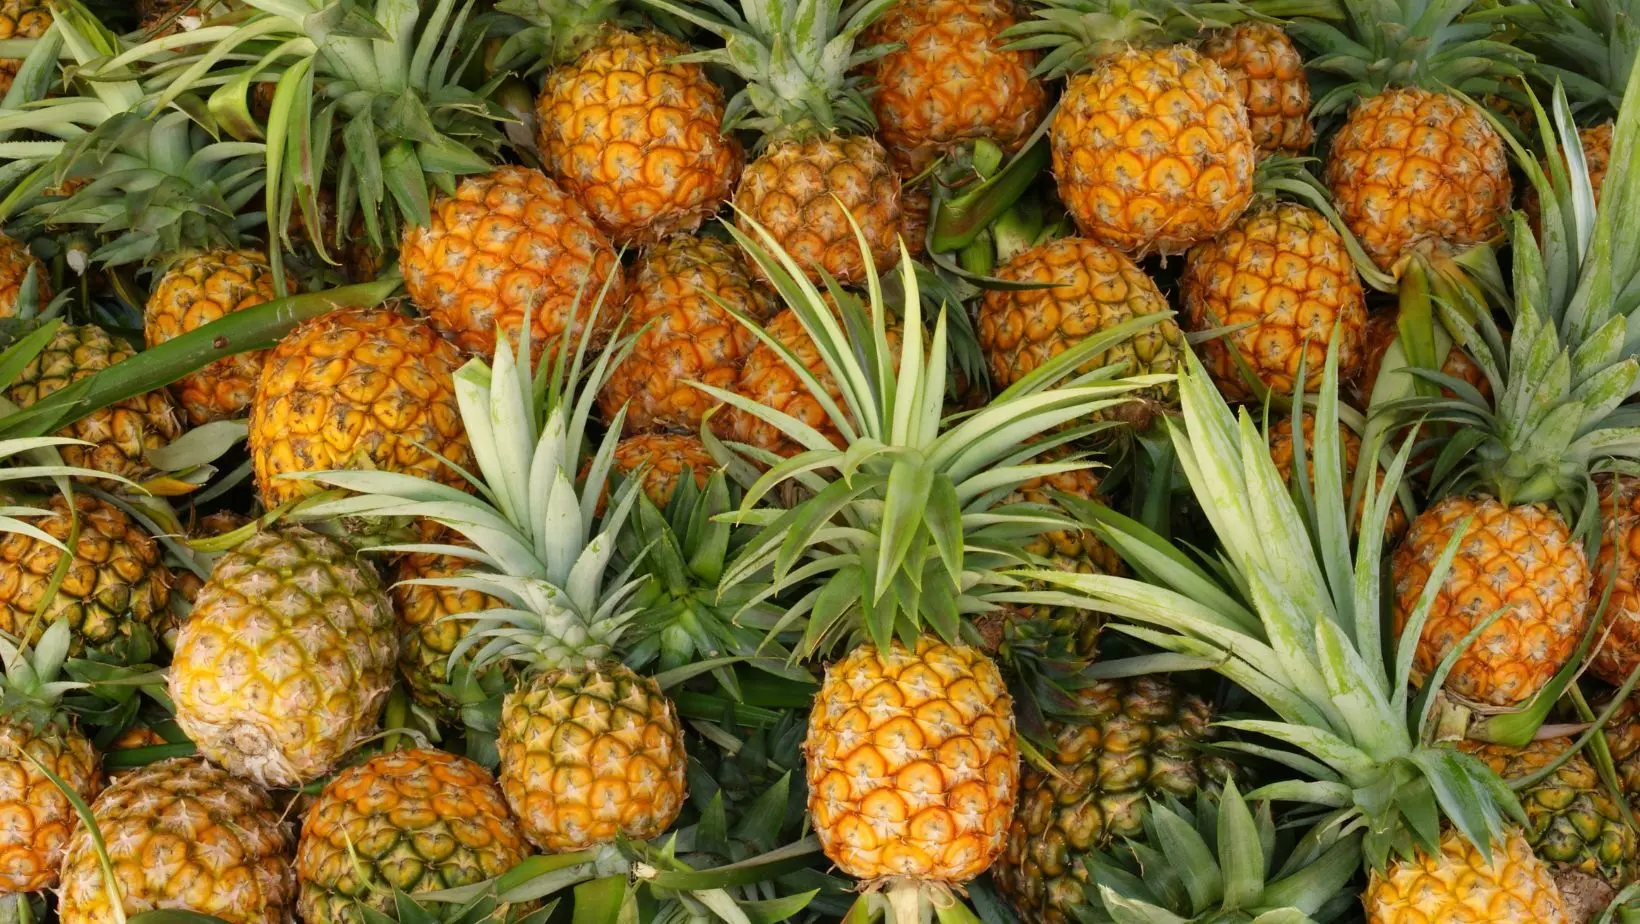 Planted pineapple instead of rubber; Prices fell: Farmers in debt